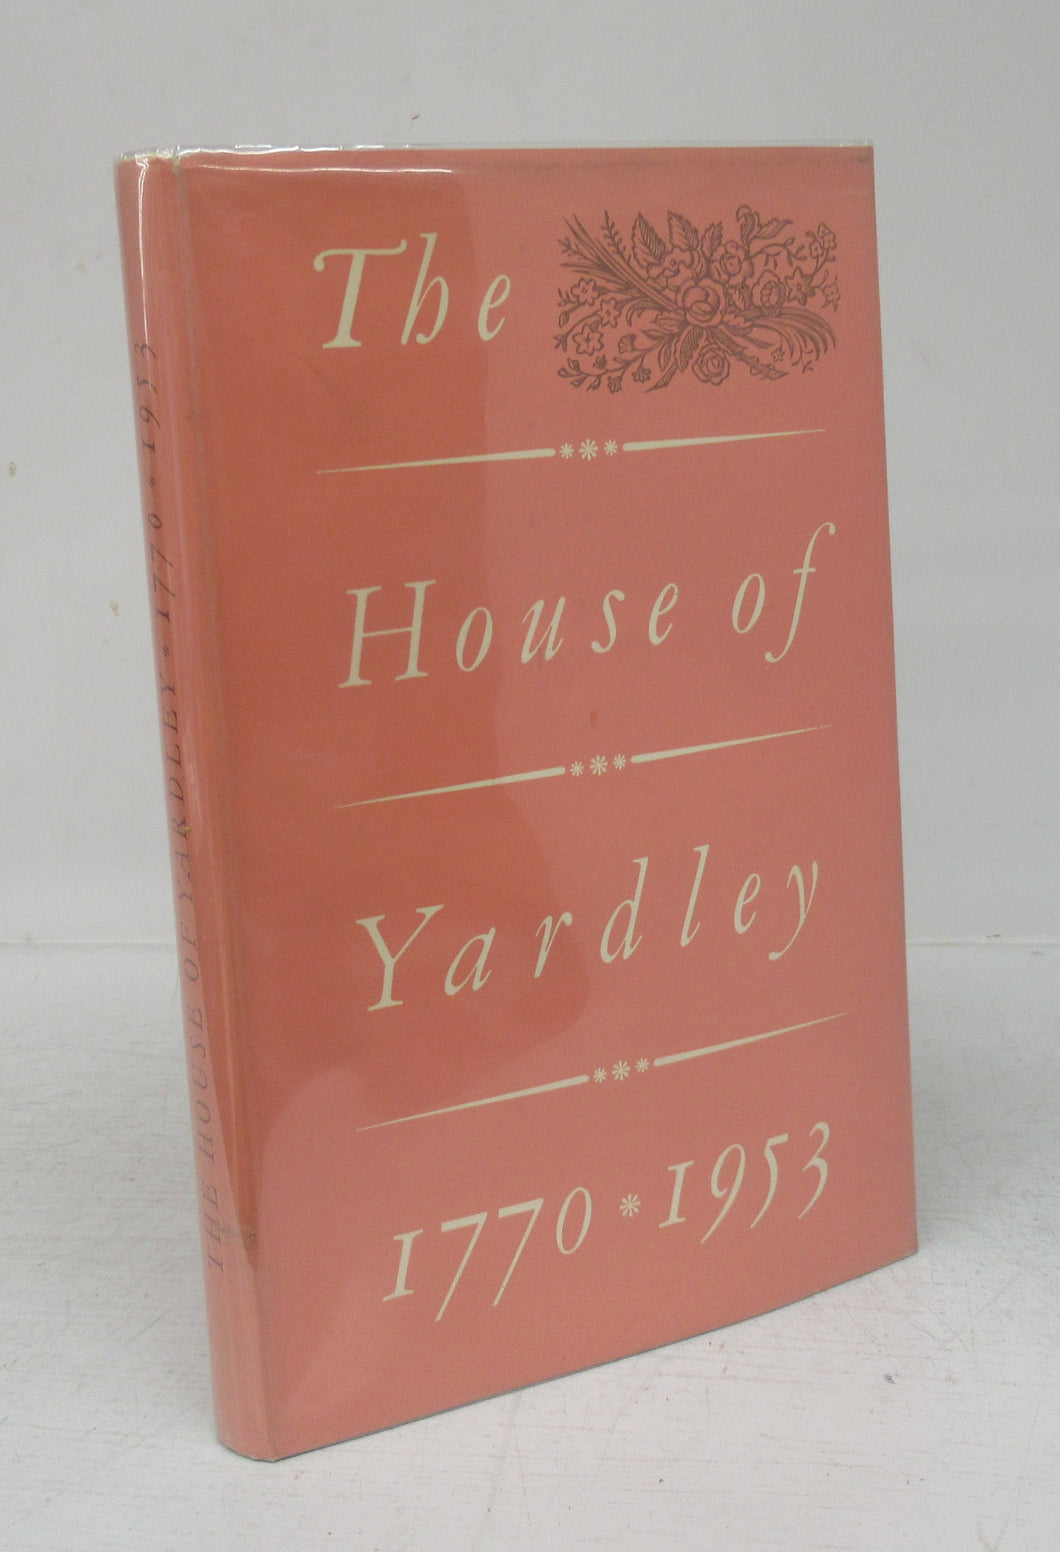 The House of Yardley 1770-1953